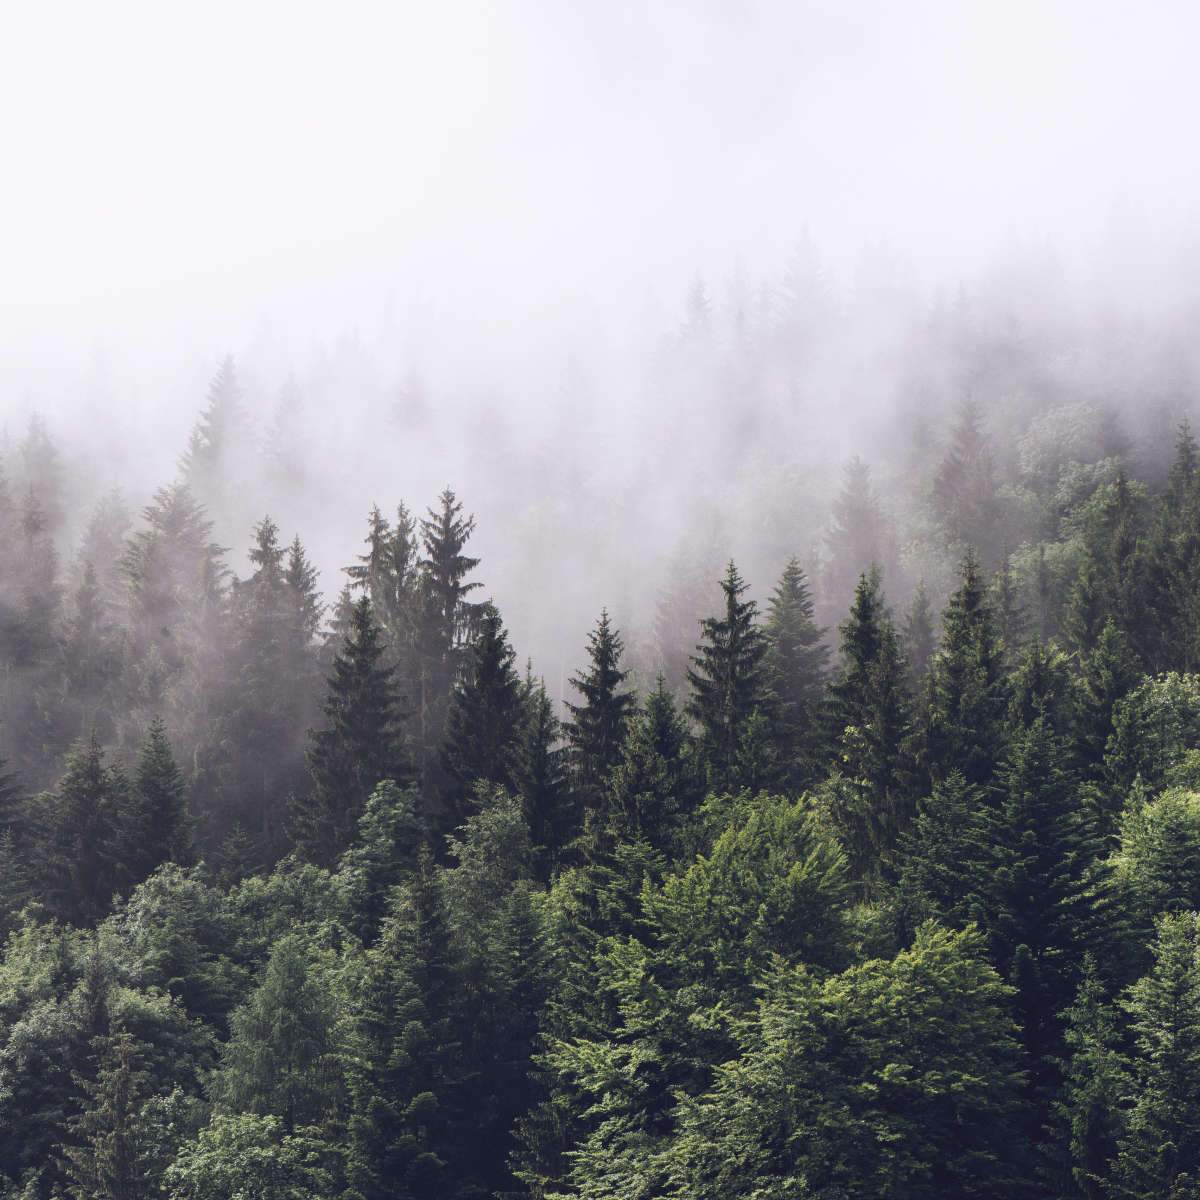 A foggy forest with trees and water - Foggy forest